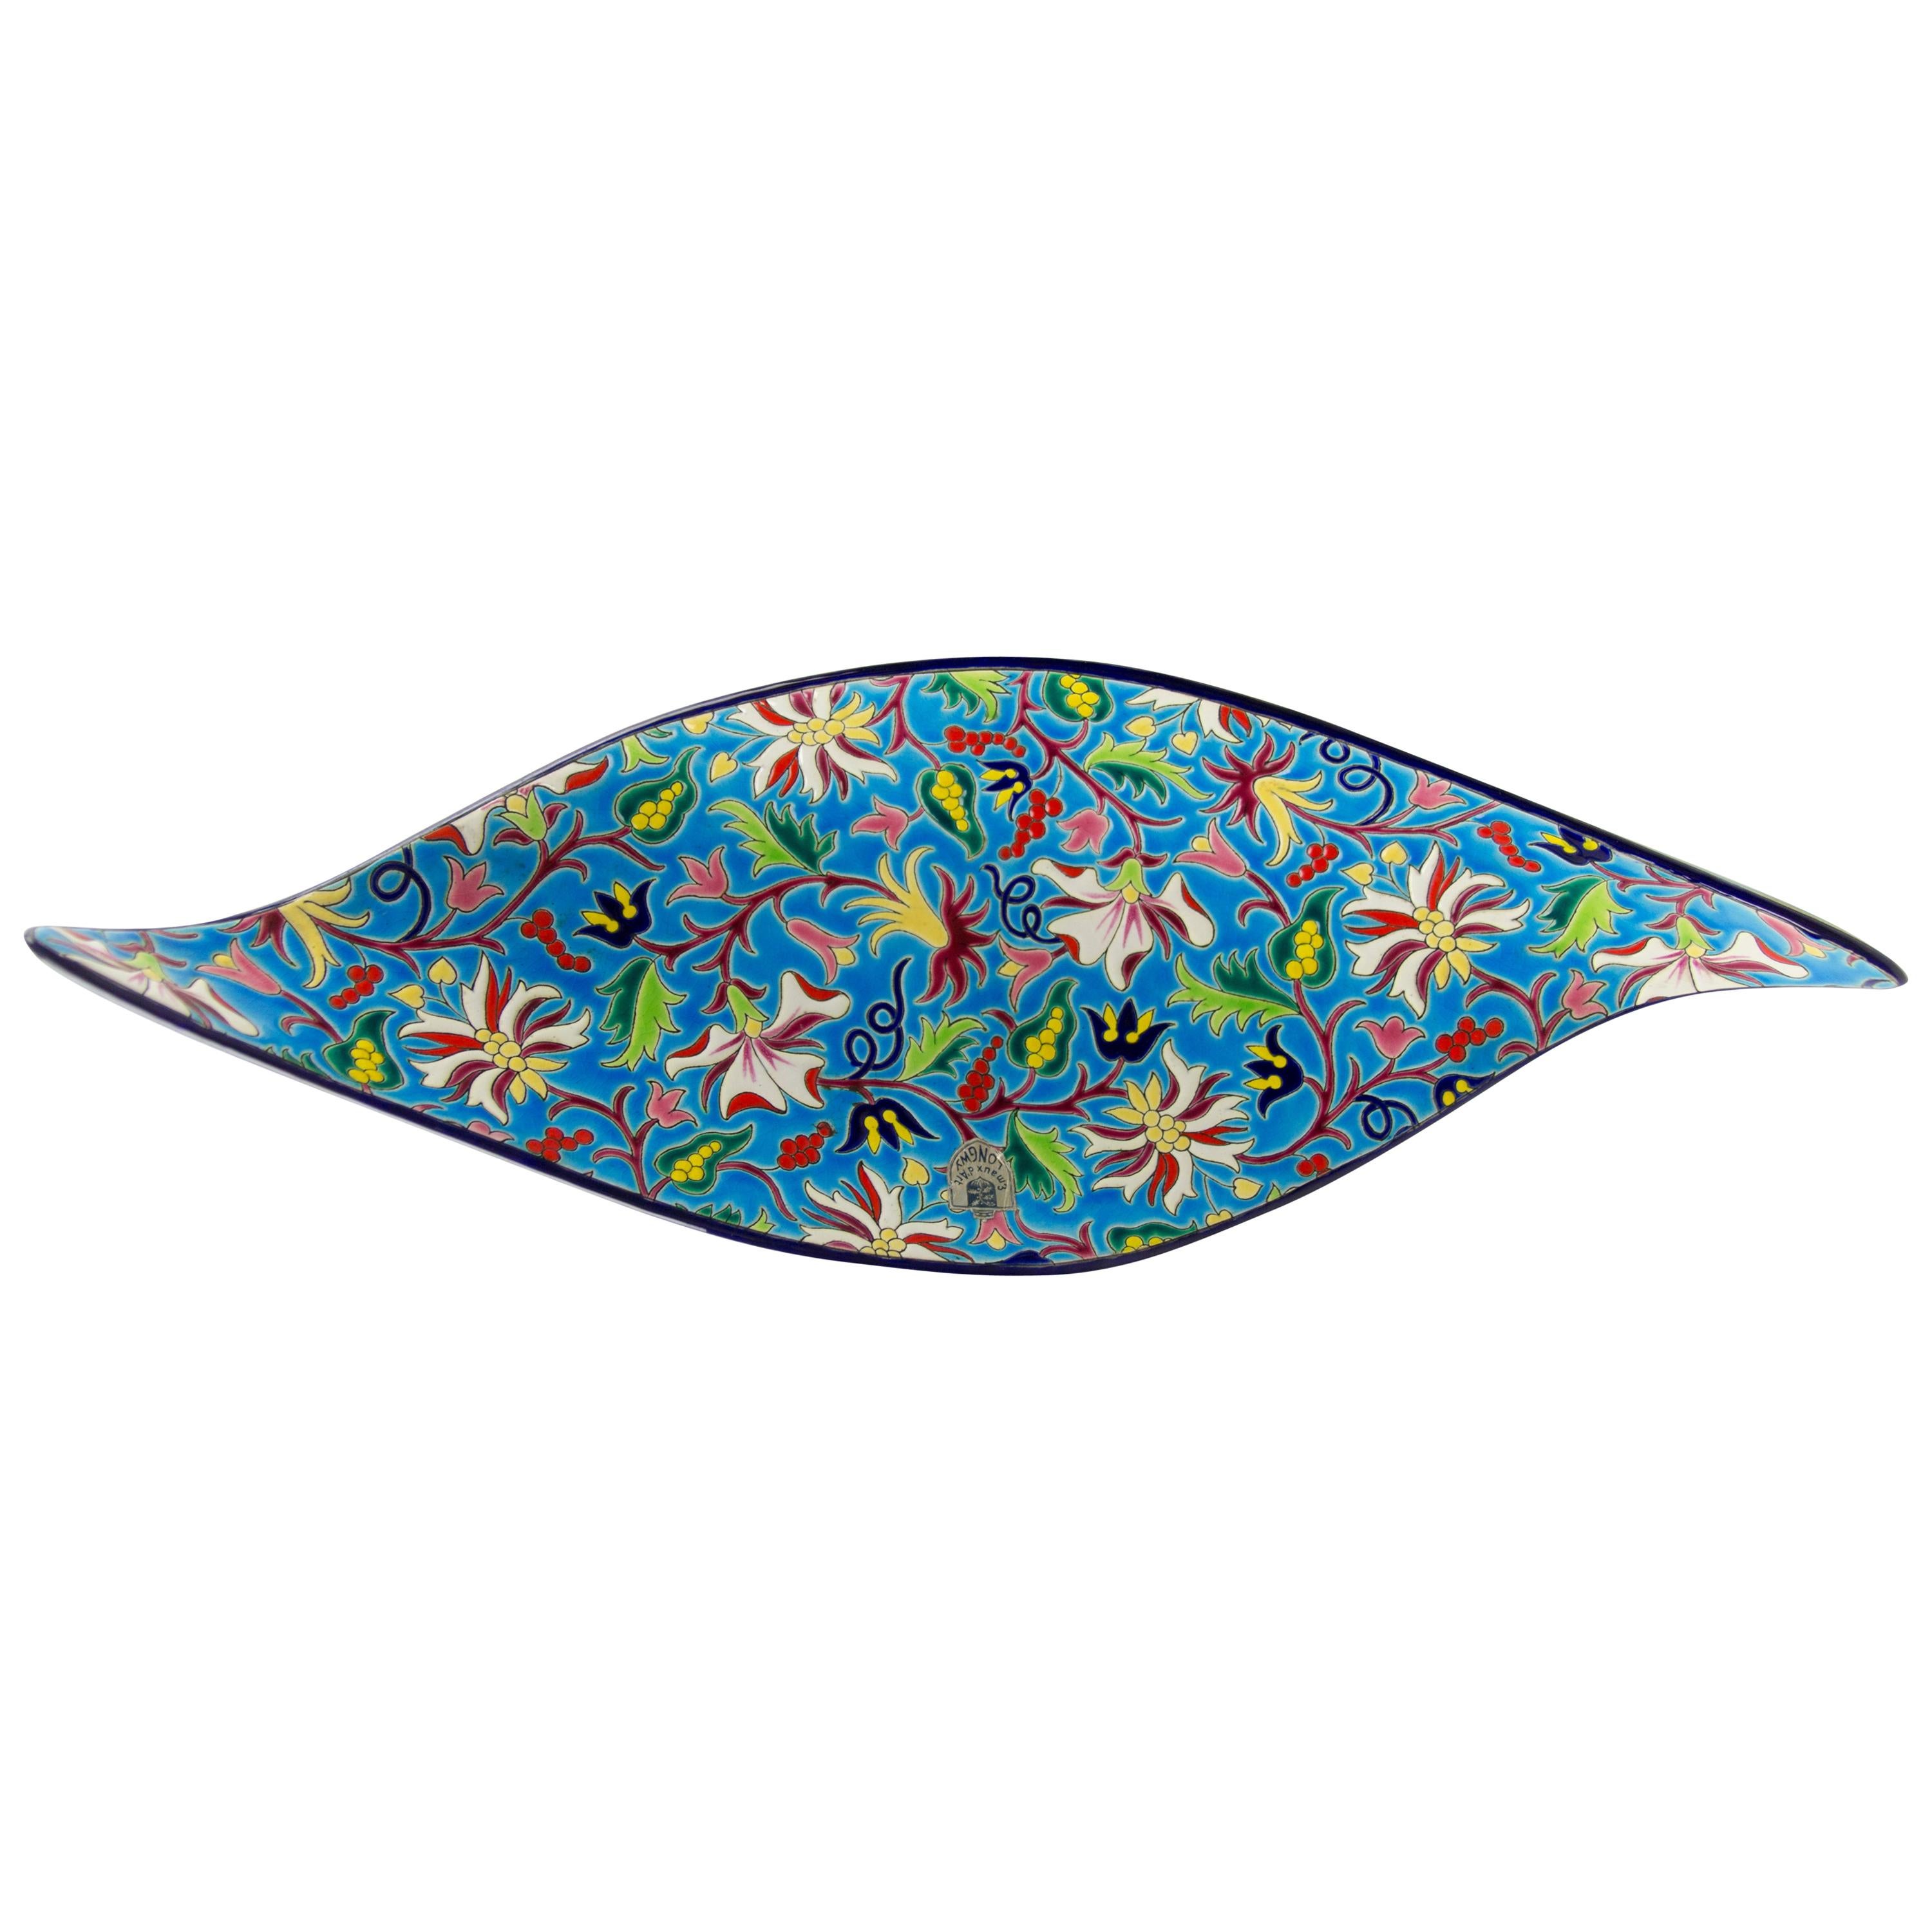 Floral and Turquoise Ceramic Fruit Platter by Manufacture of Longwy Enamels